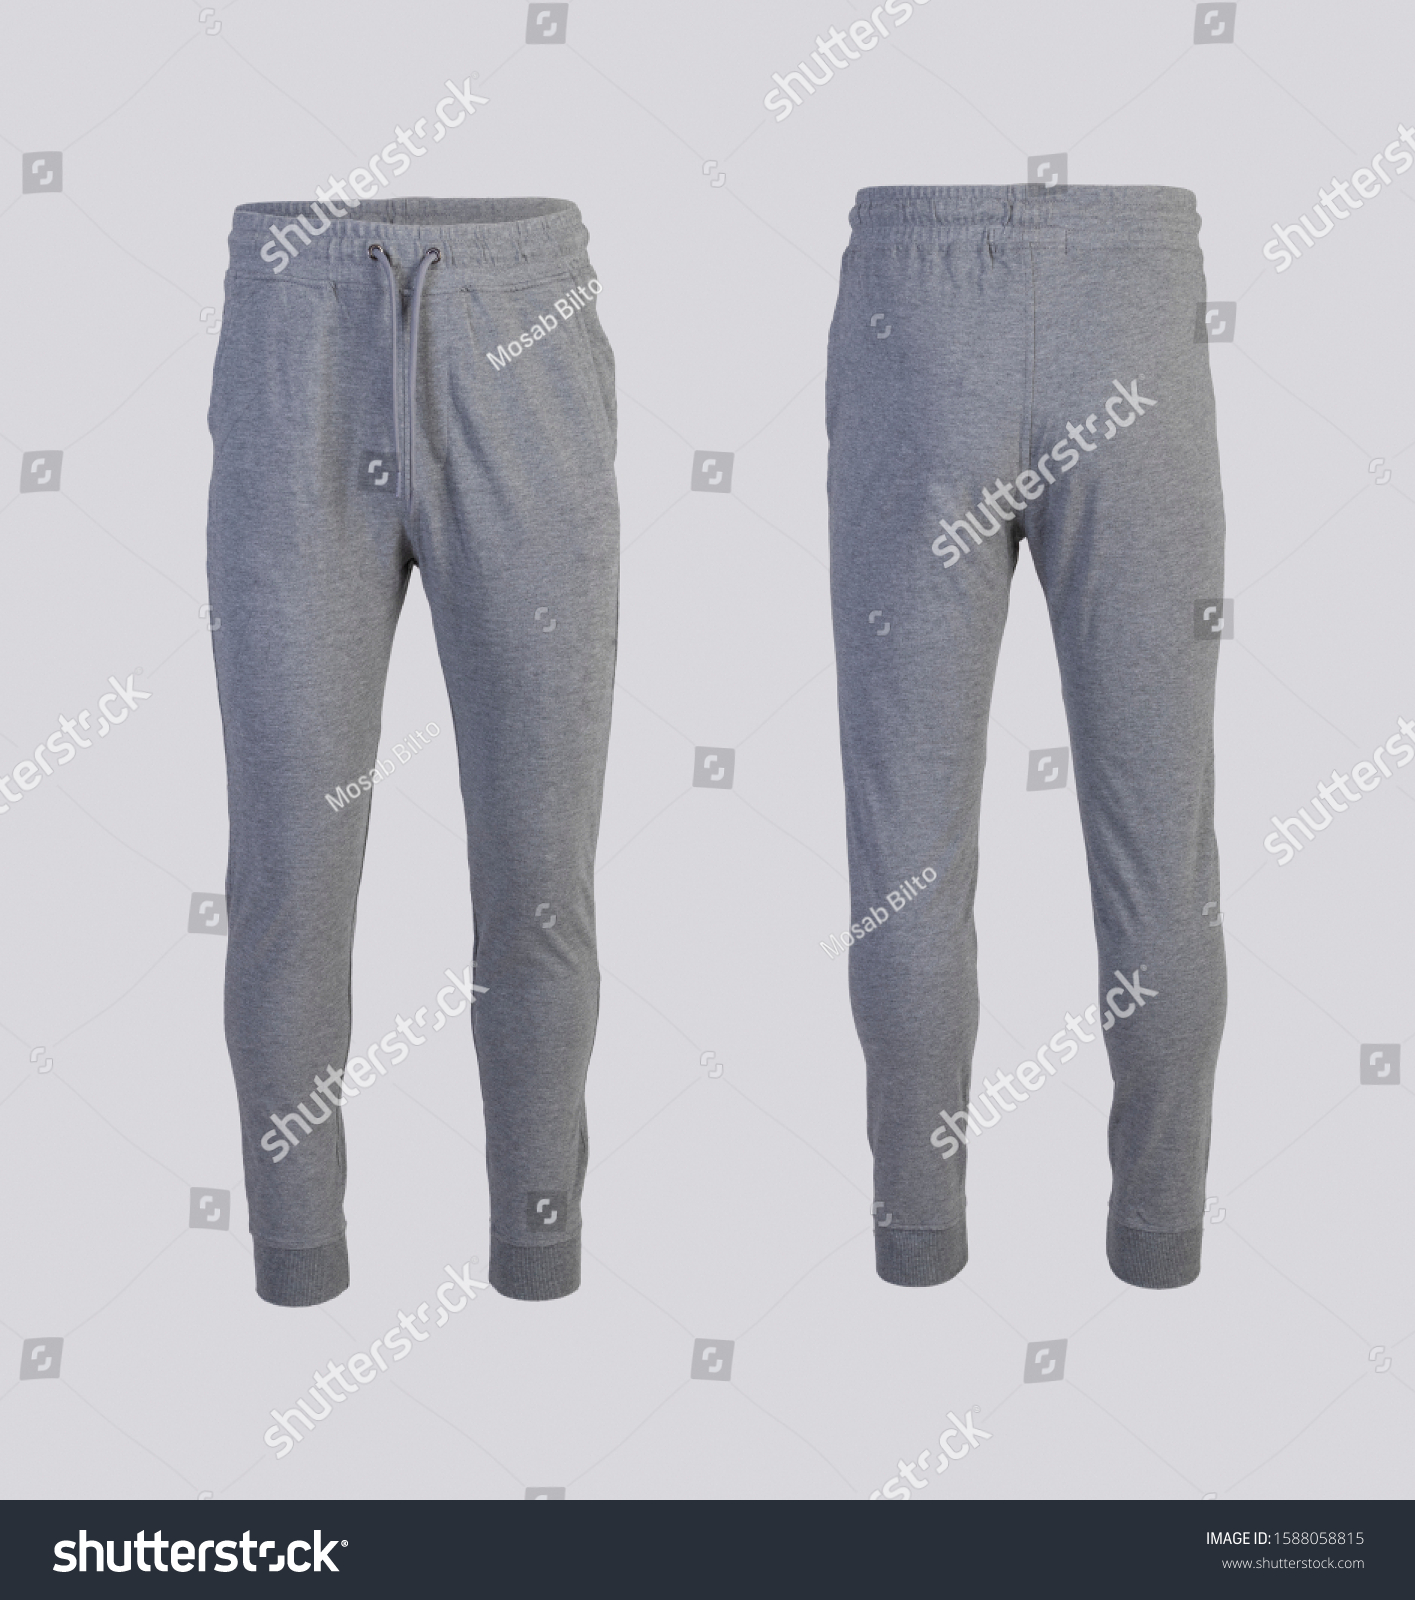 Pant Stock Photos, Images & Photography | Shutterstock